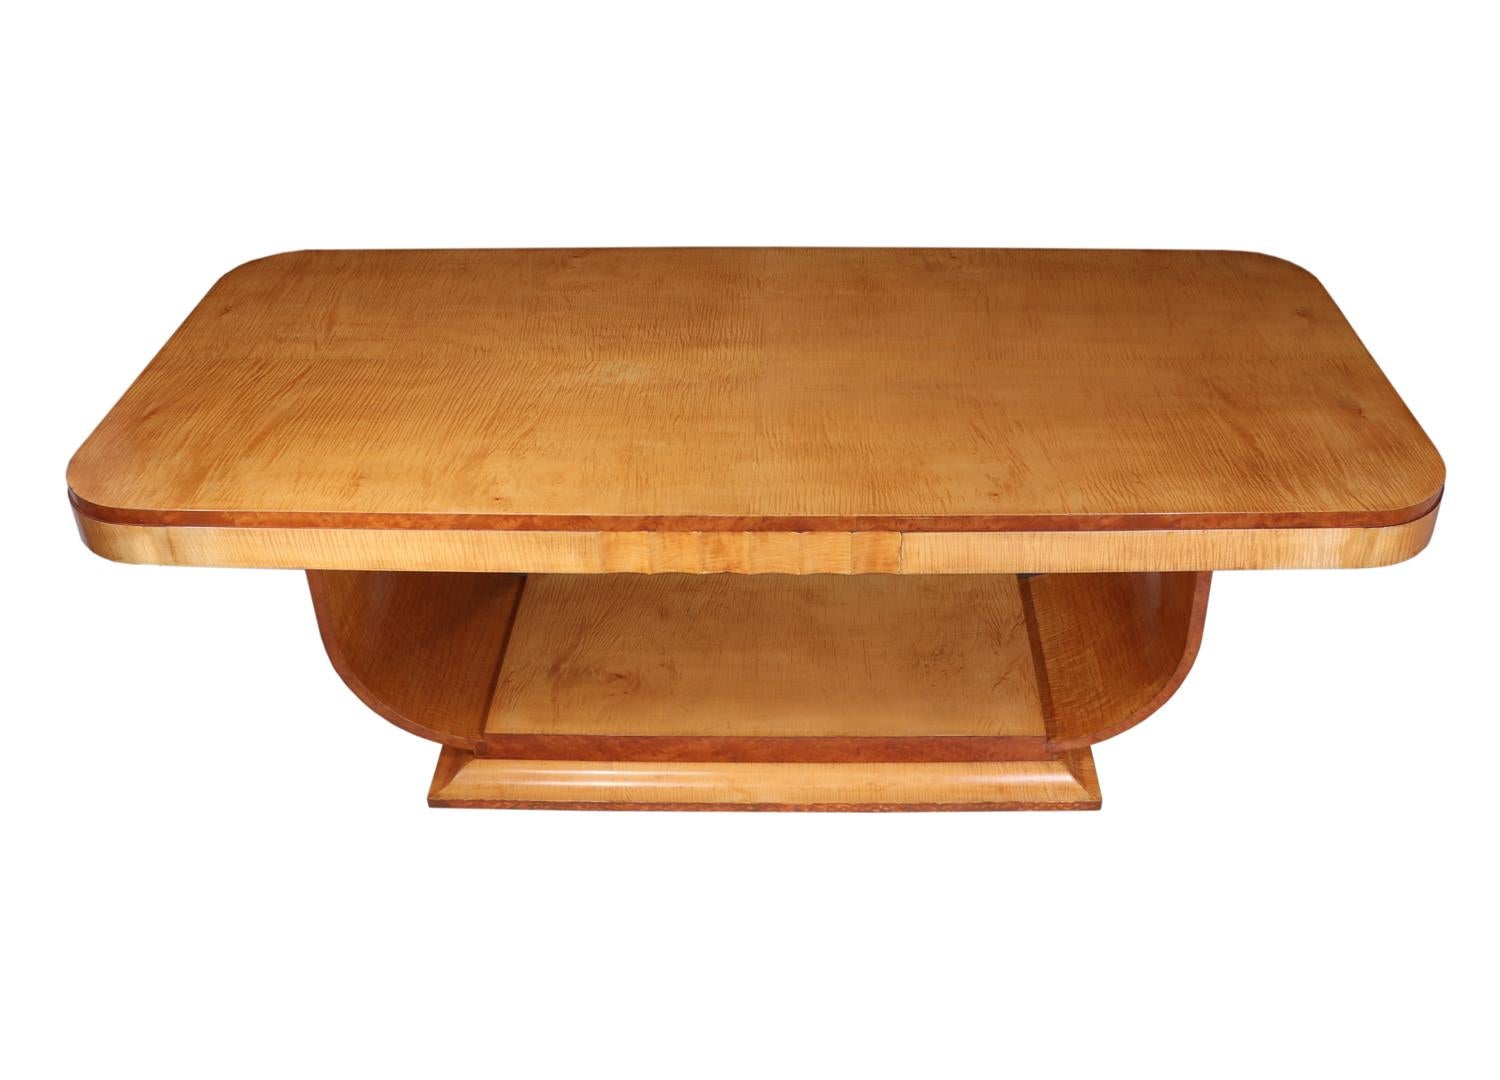 British Art Deco Dining Table by Epstein in Sycamore, circa 1930